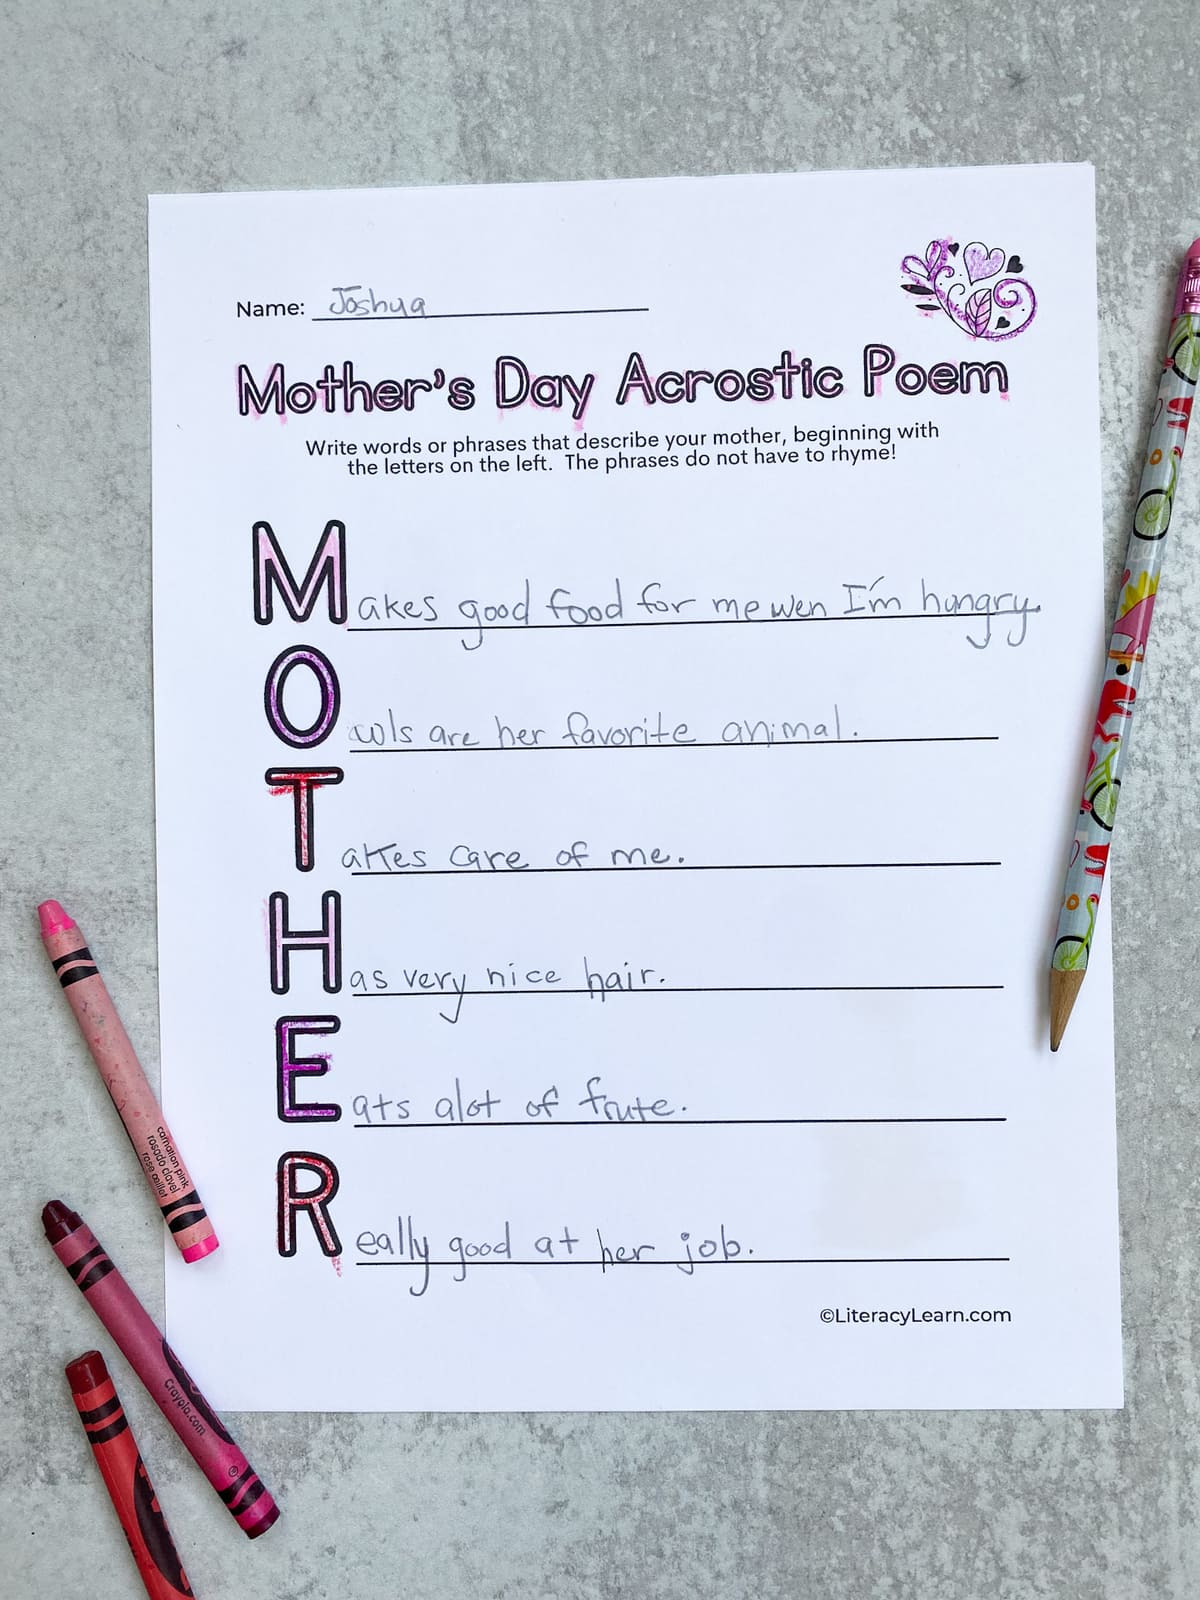 A child's printed and finished Mother's Day acrostic poem. 